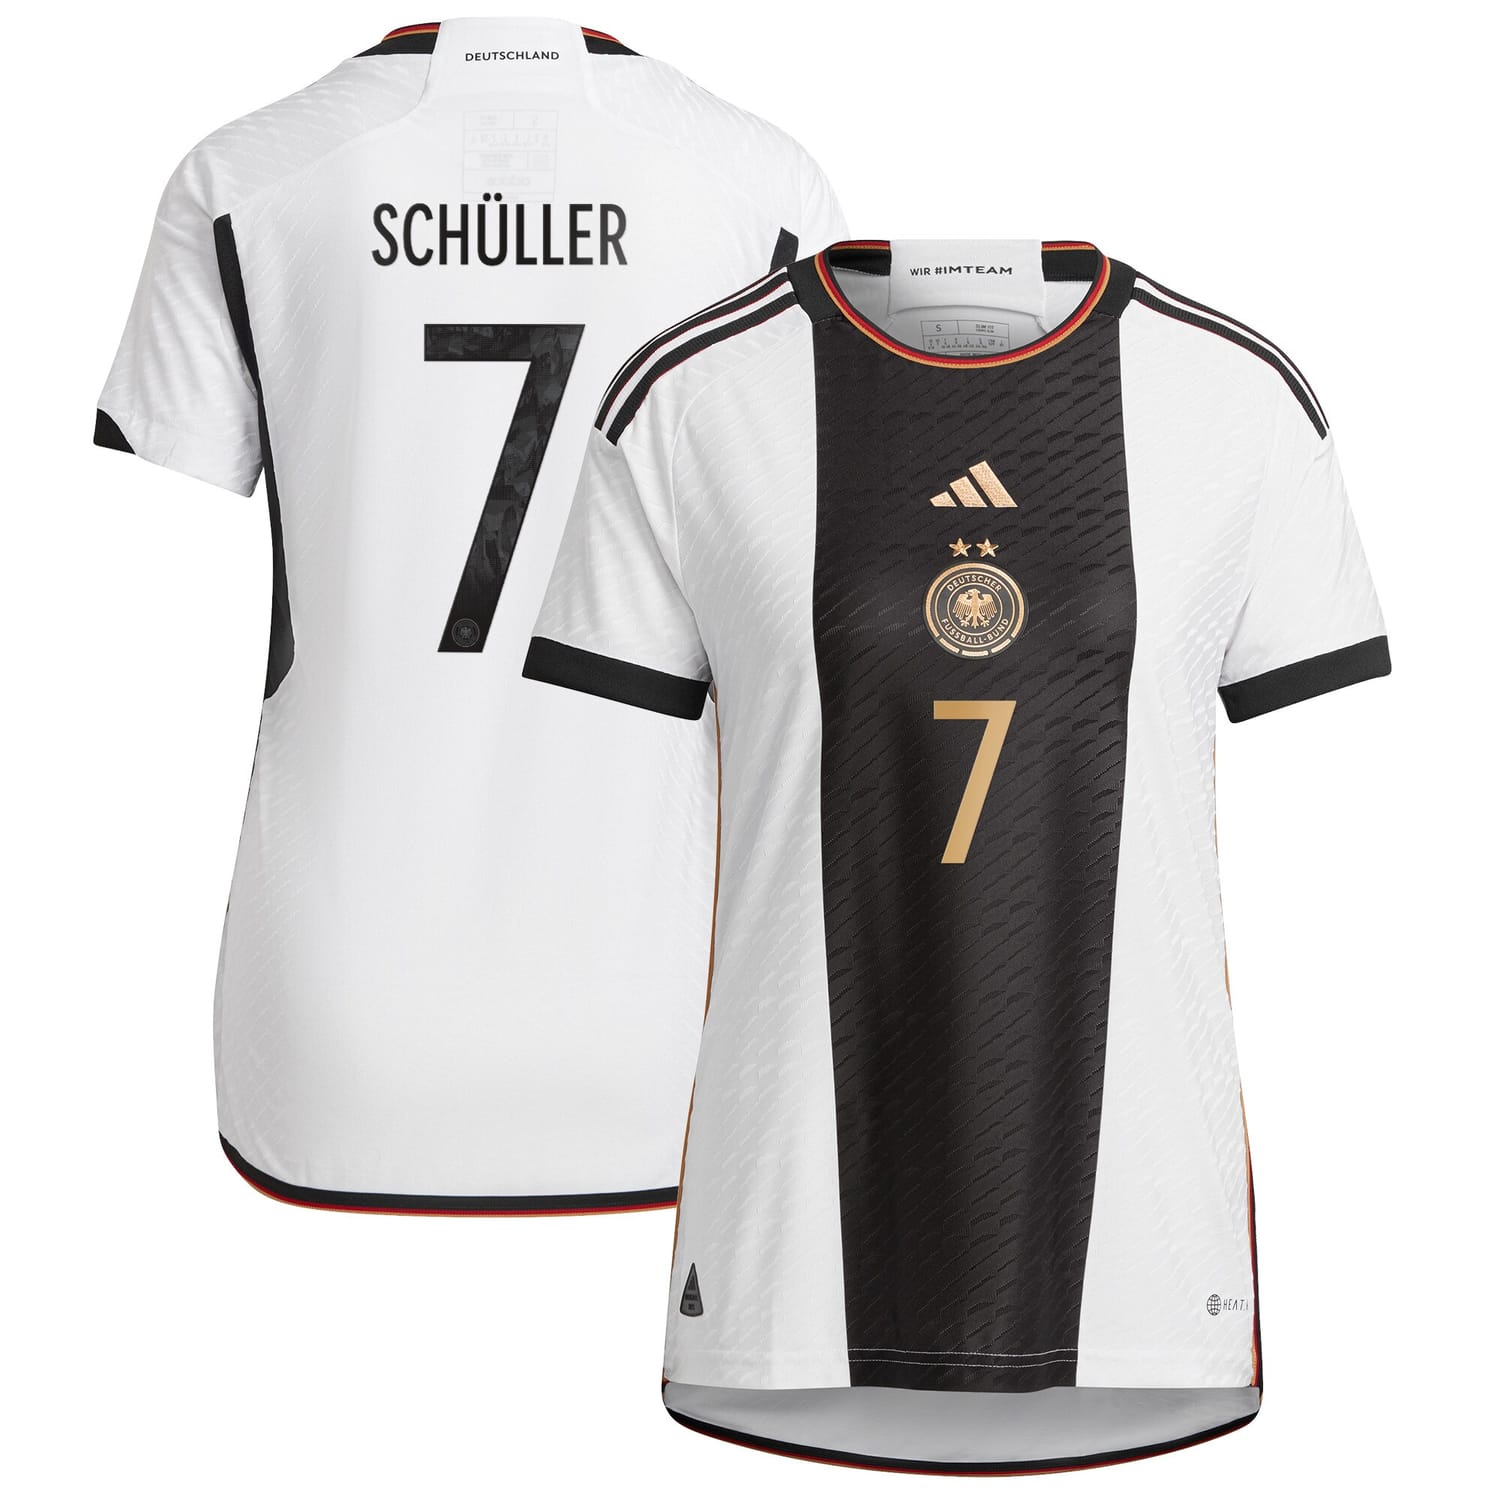 Germany National Team Home Authentic Jersey Shirt player Lea Schüller 7 printing for Women